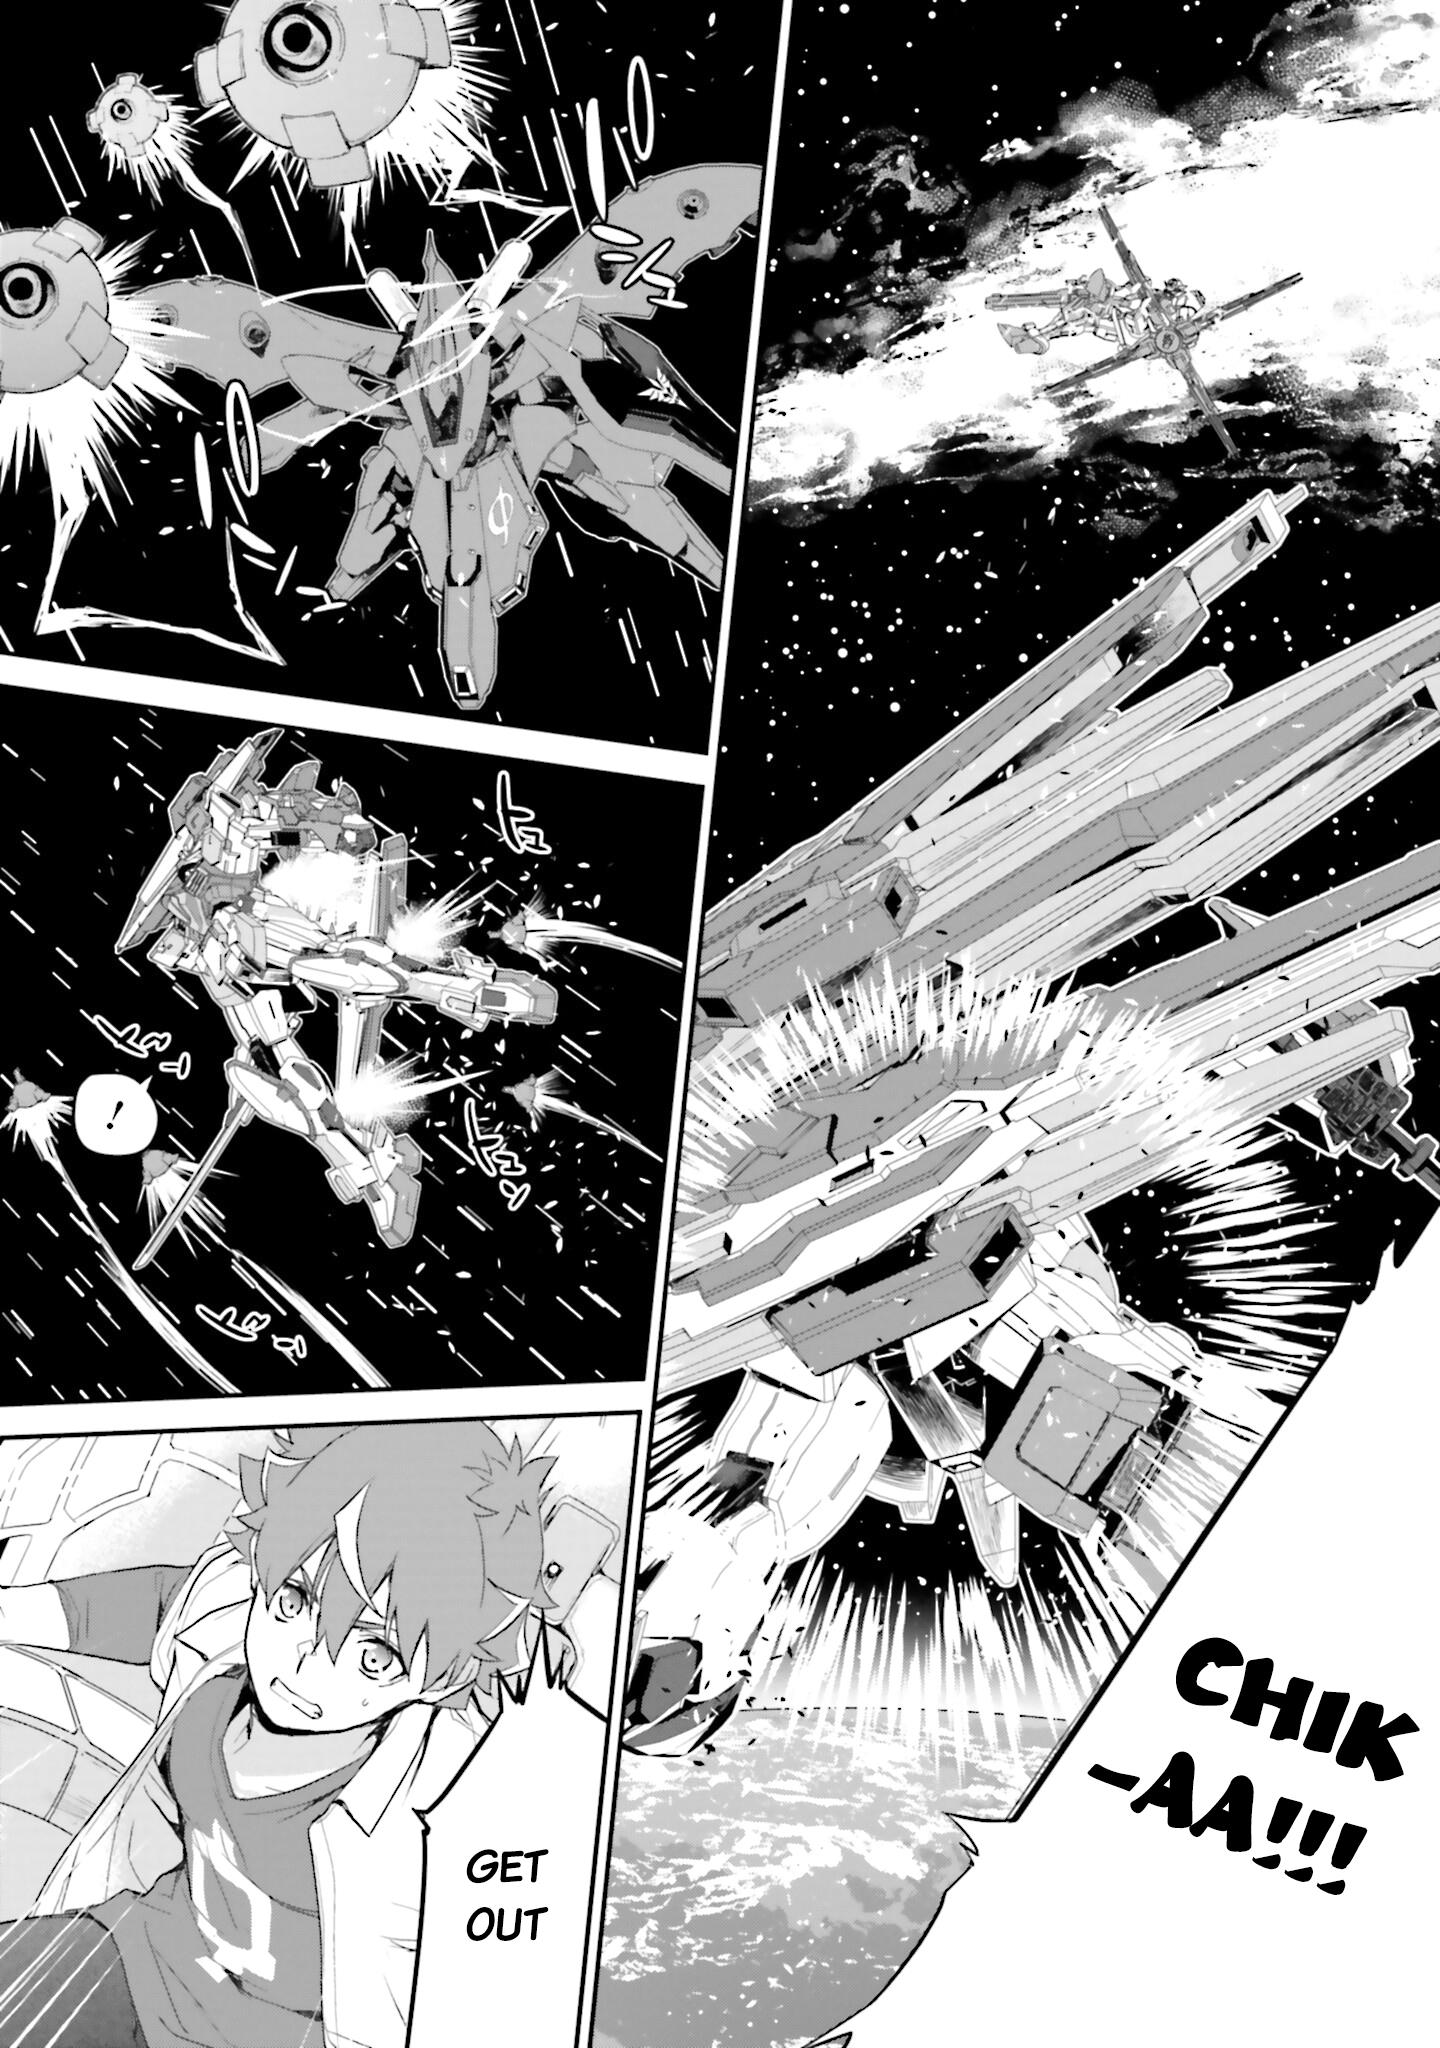 Mobile Suit Gundam N-Extreme Vol.1 Chapter 5: Mission 5 [Beyond The Axis] -Part 2- - Picture 3